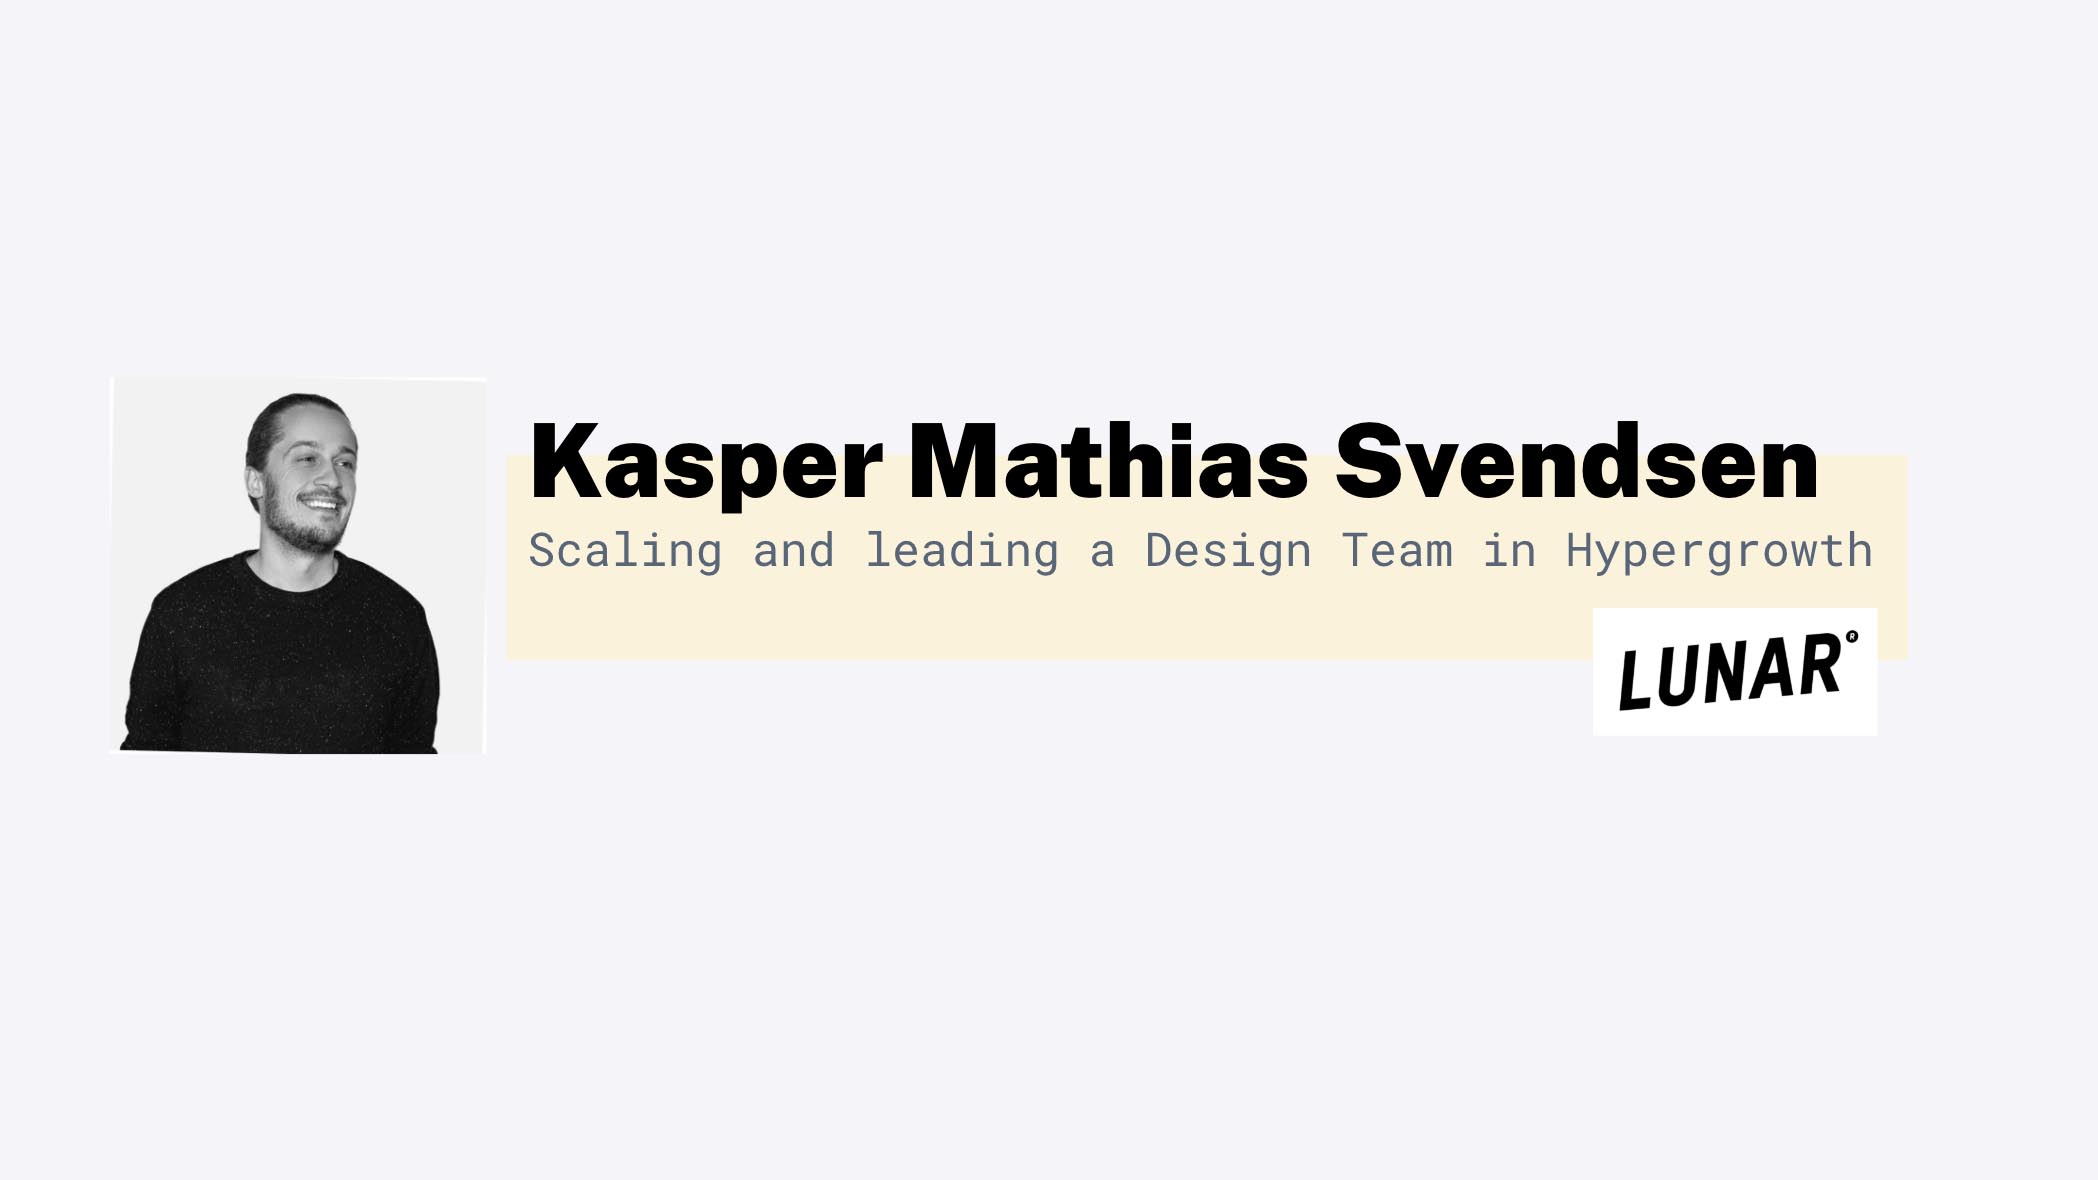 Scaling and leading a design team in hypergrowth